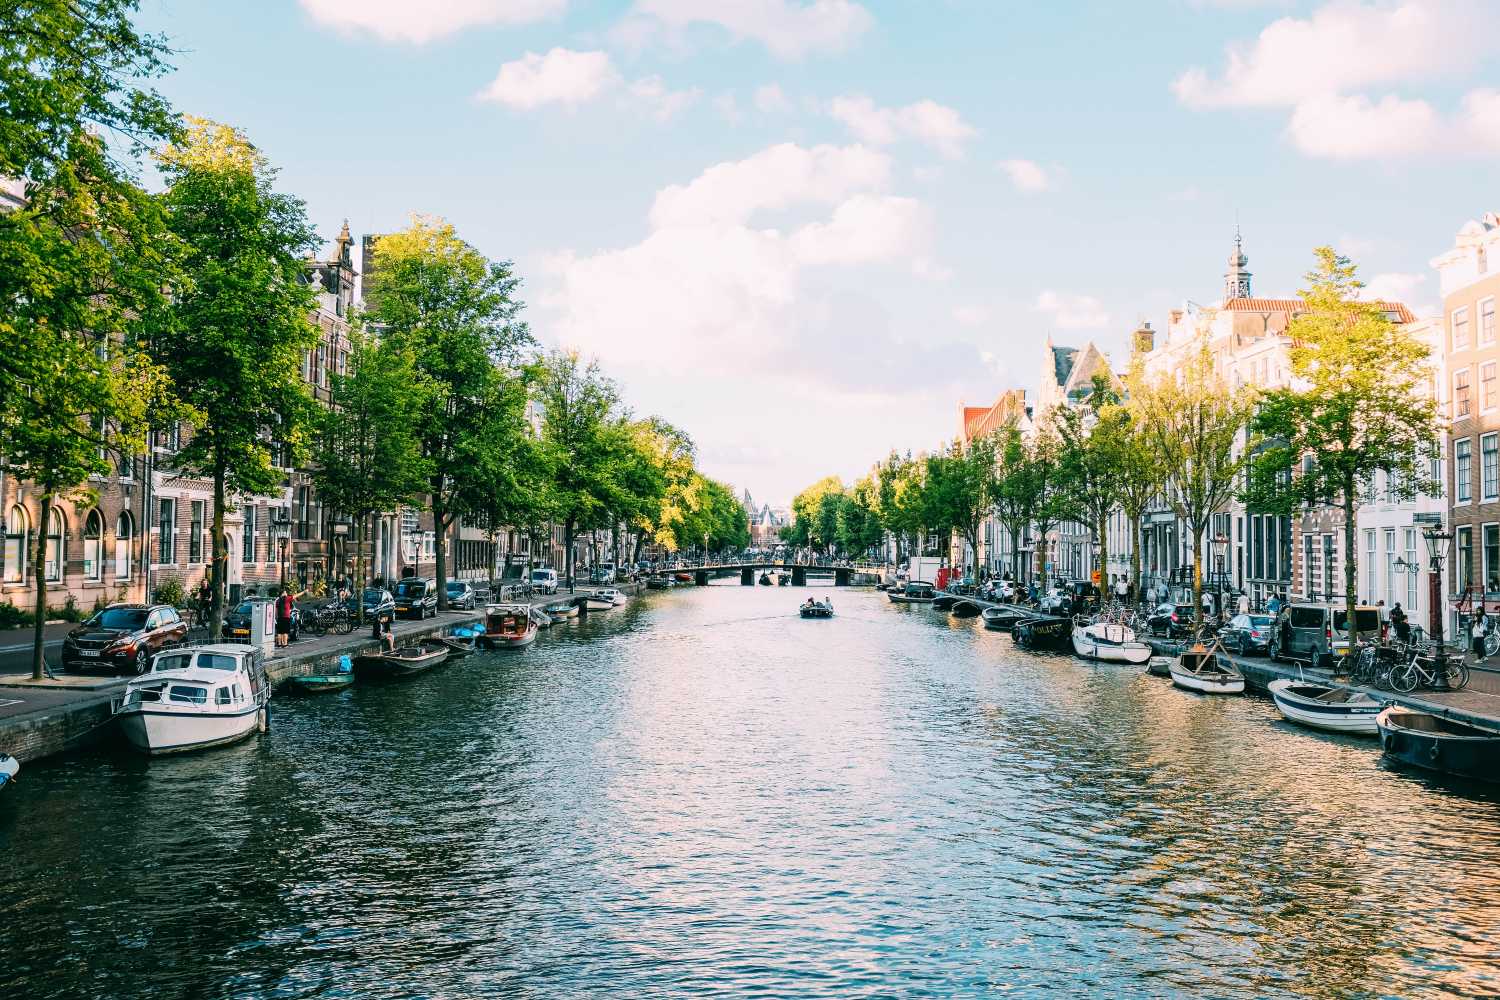 View of a canal in Amsterdam - to experience on an Amsterdam holiday